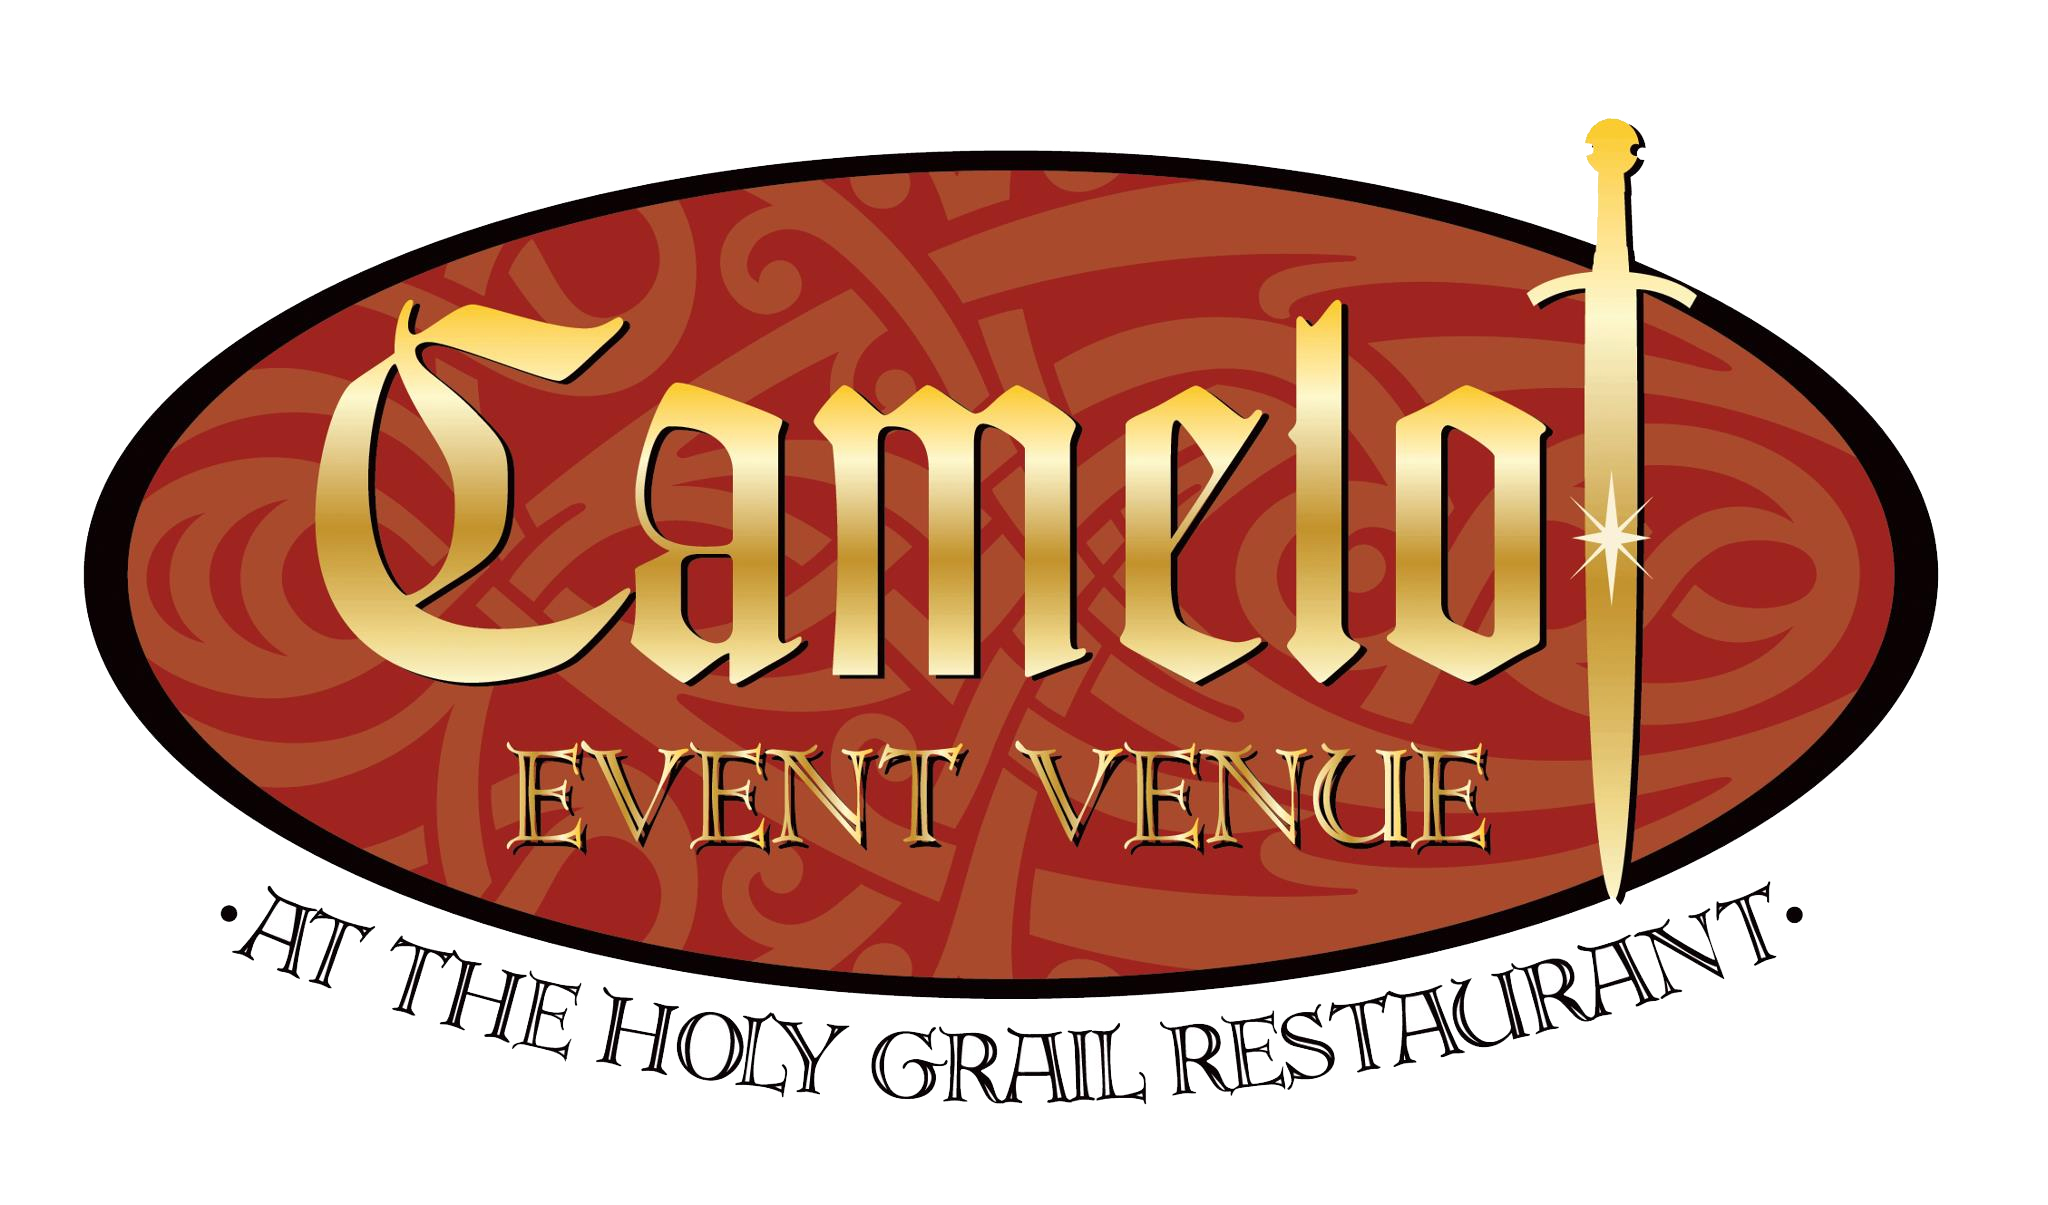 Camelot Events Venue @ The Holy Grail Restaurant